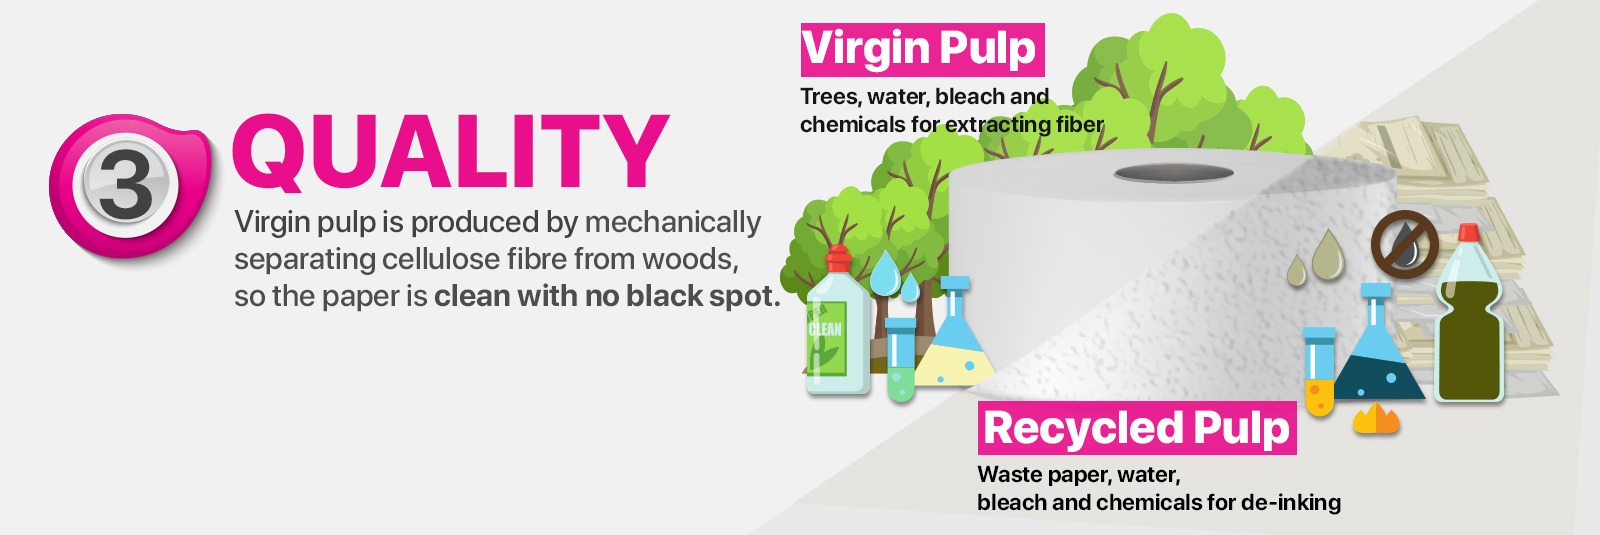 Quality - Virgin pulp is produced by mechanically separating cellulose fibre from woods, so the paper is clean with no black spot. Virgin Pulp made from Trees, water, bleach and chemicals for extracting fiber. recycled pulp made form waste paper, water, bleach and chemicals for de-inking.